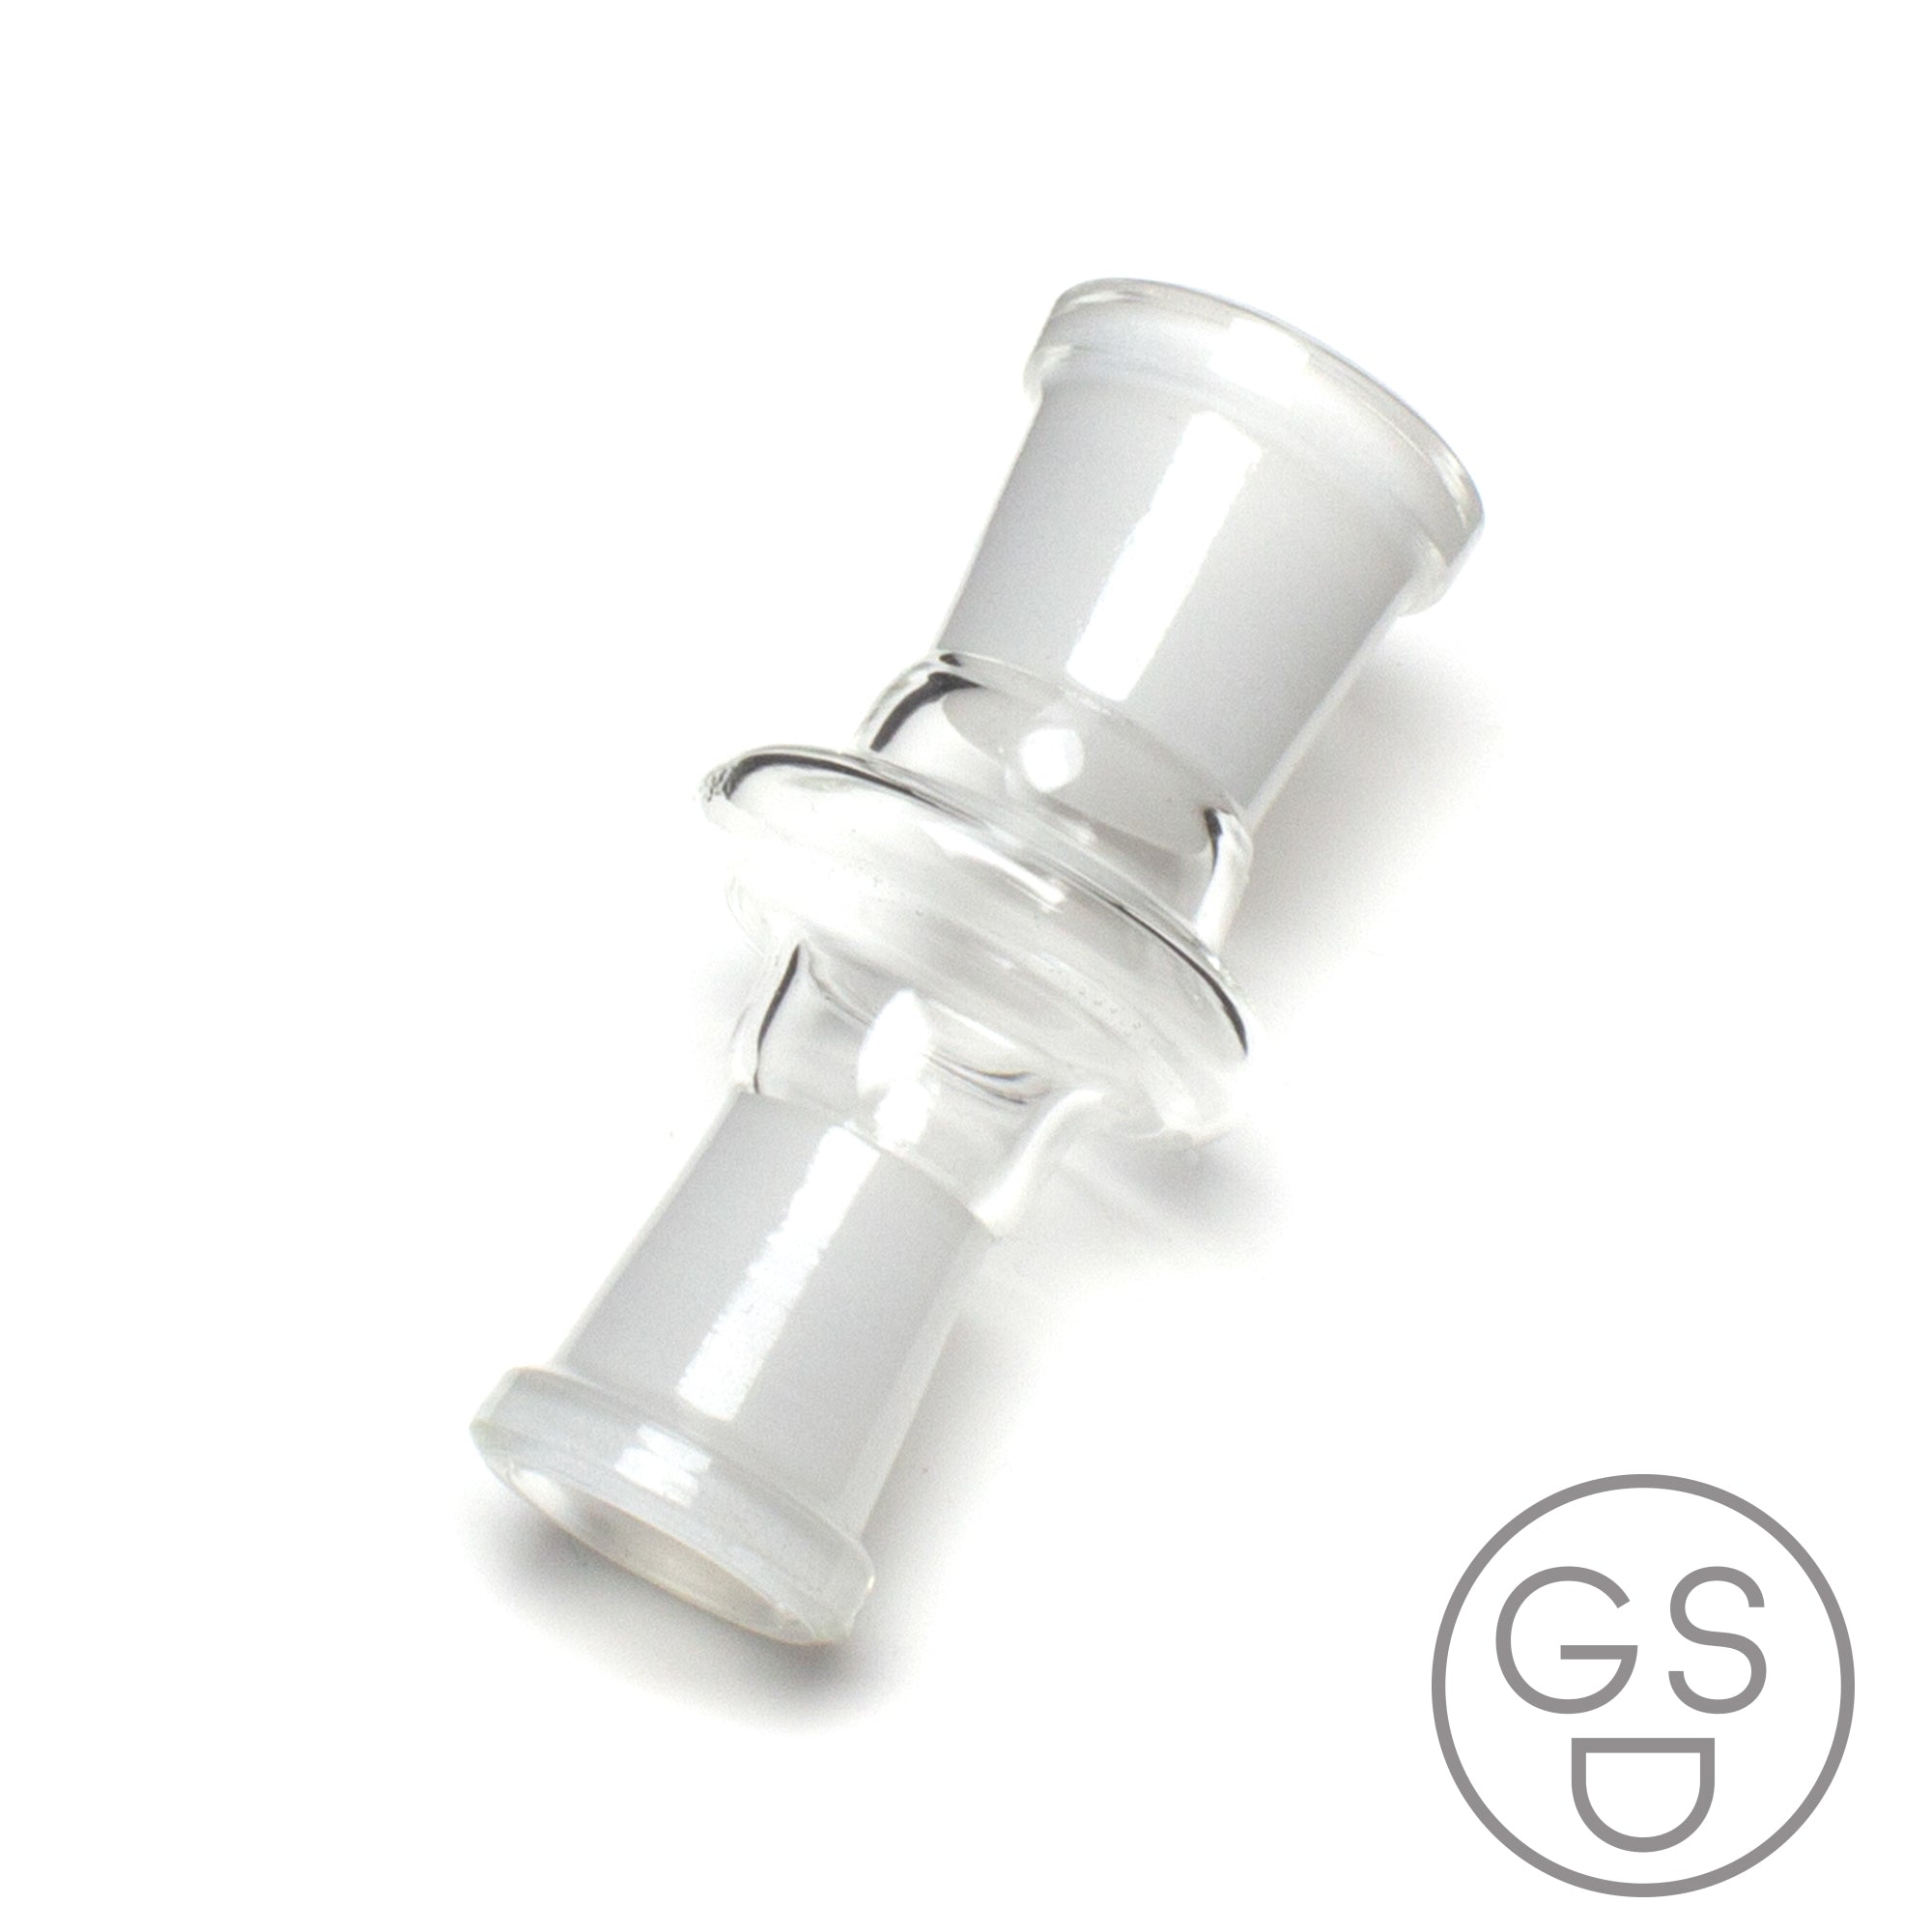 Female To Female Glass Adapter